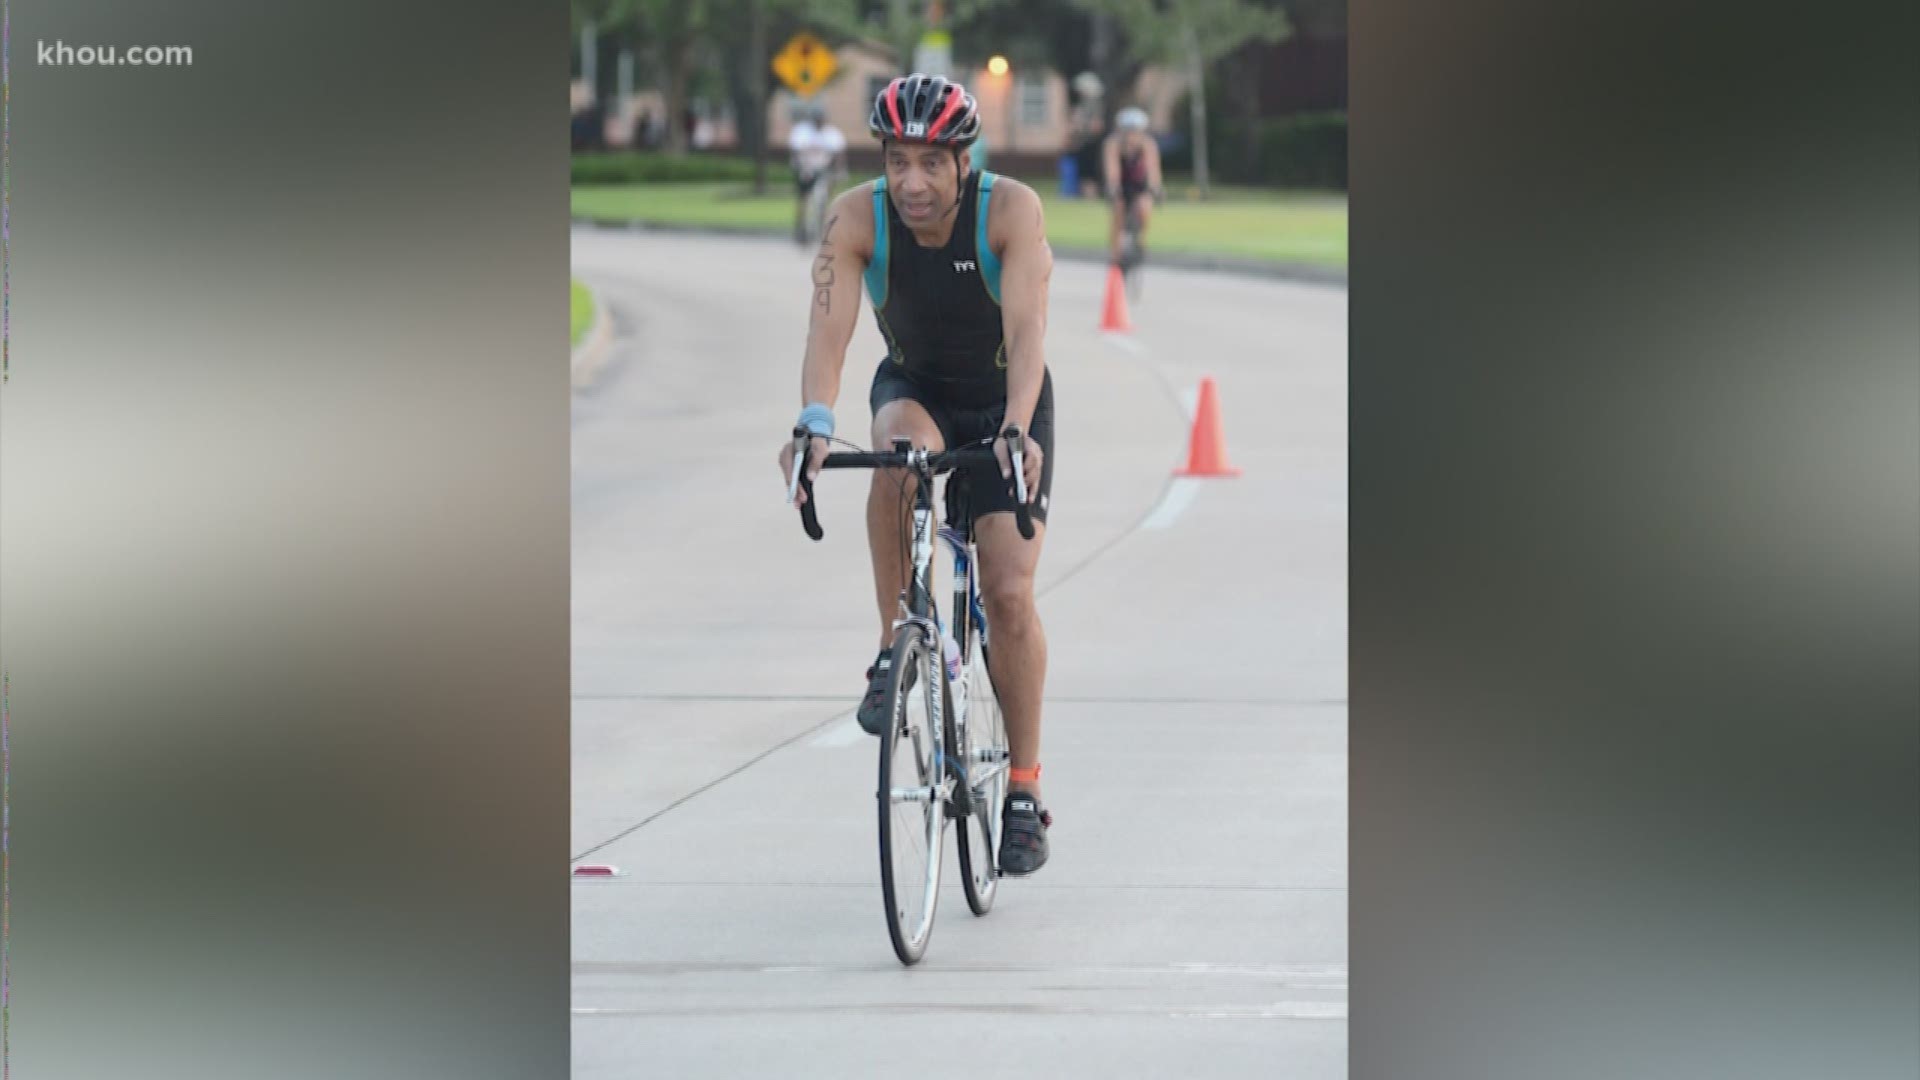 KHOU 11 Anchor Len Cannon participated in the Try Andy's Tri on Sunday in Sugar Land. Cannon had do a 300 meter swim, 10 mile bike ride and 3 mile run. 